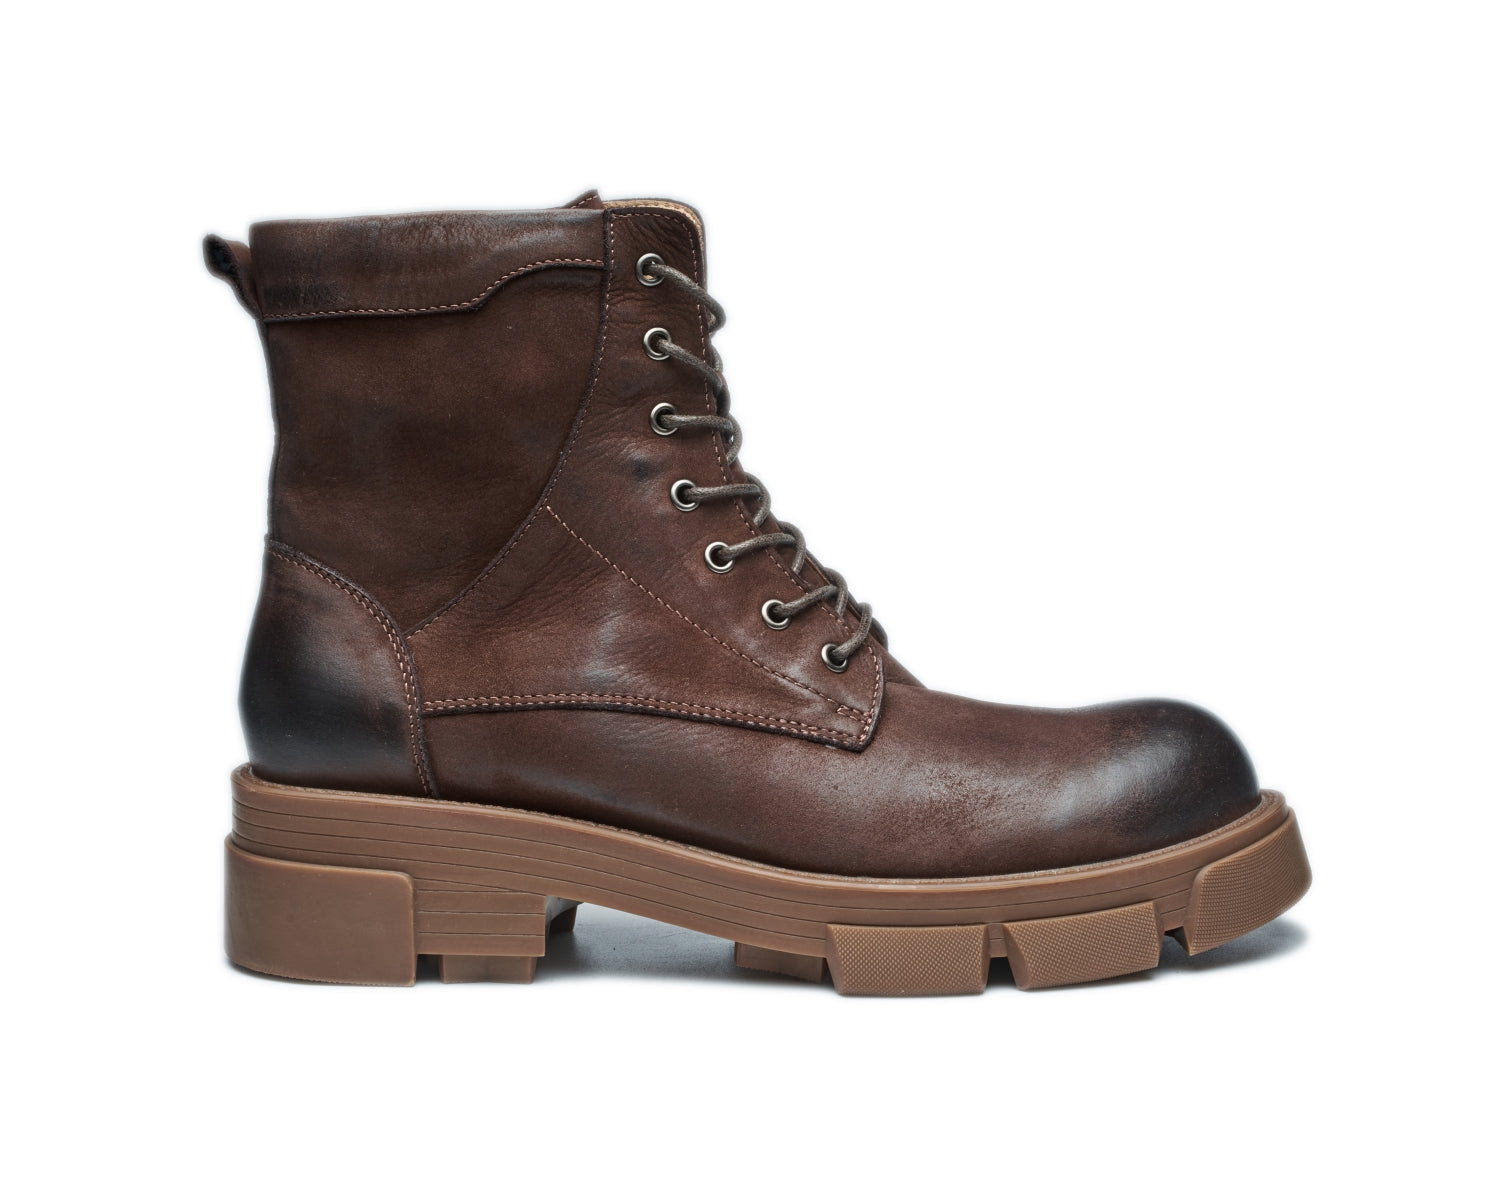 Men's lace-up zipper work boots with lug sole in various styles including manner, old, and skin boots4